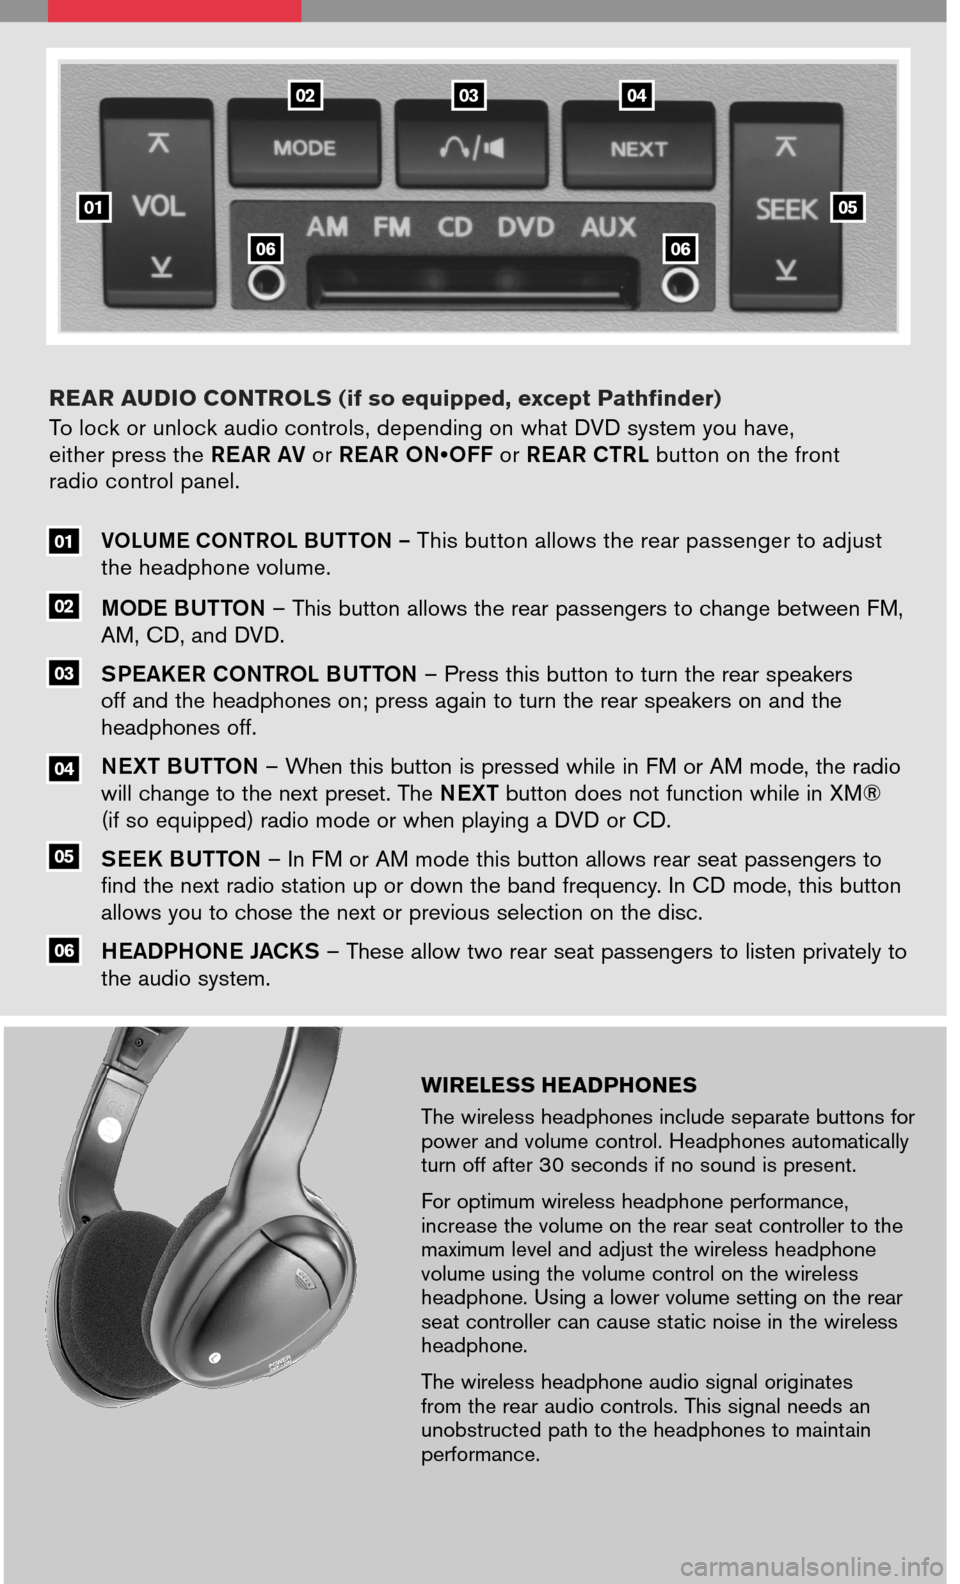 NISSAN ROGUE 2008 1.G Entertainment Syst 
WIRELESS HEADPHONES
The wireless headphones include separate buttons for power and volume control. Headphones automatically turn off after 30 seconds if no sound is present.
For optimum wireless head